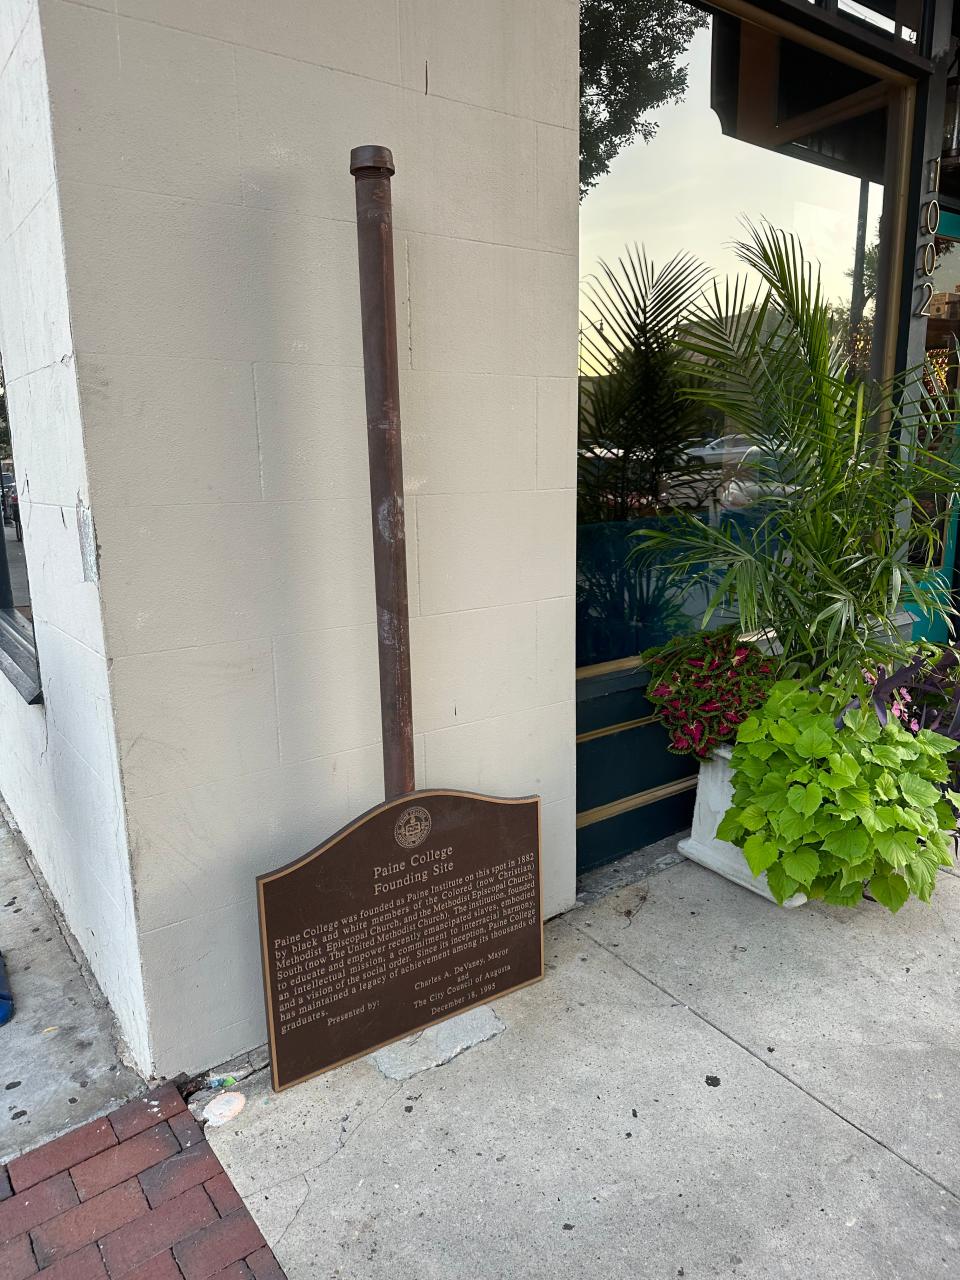 The Paine College marker was knocked down at Broad and 10th streets in Augusta.